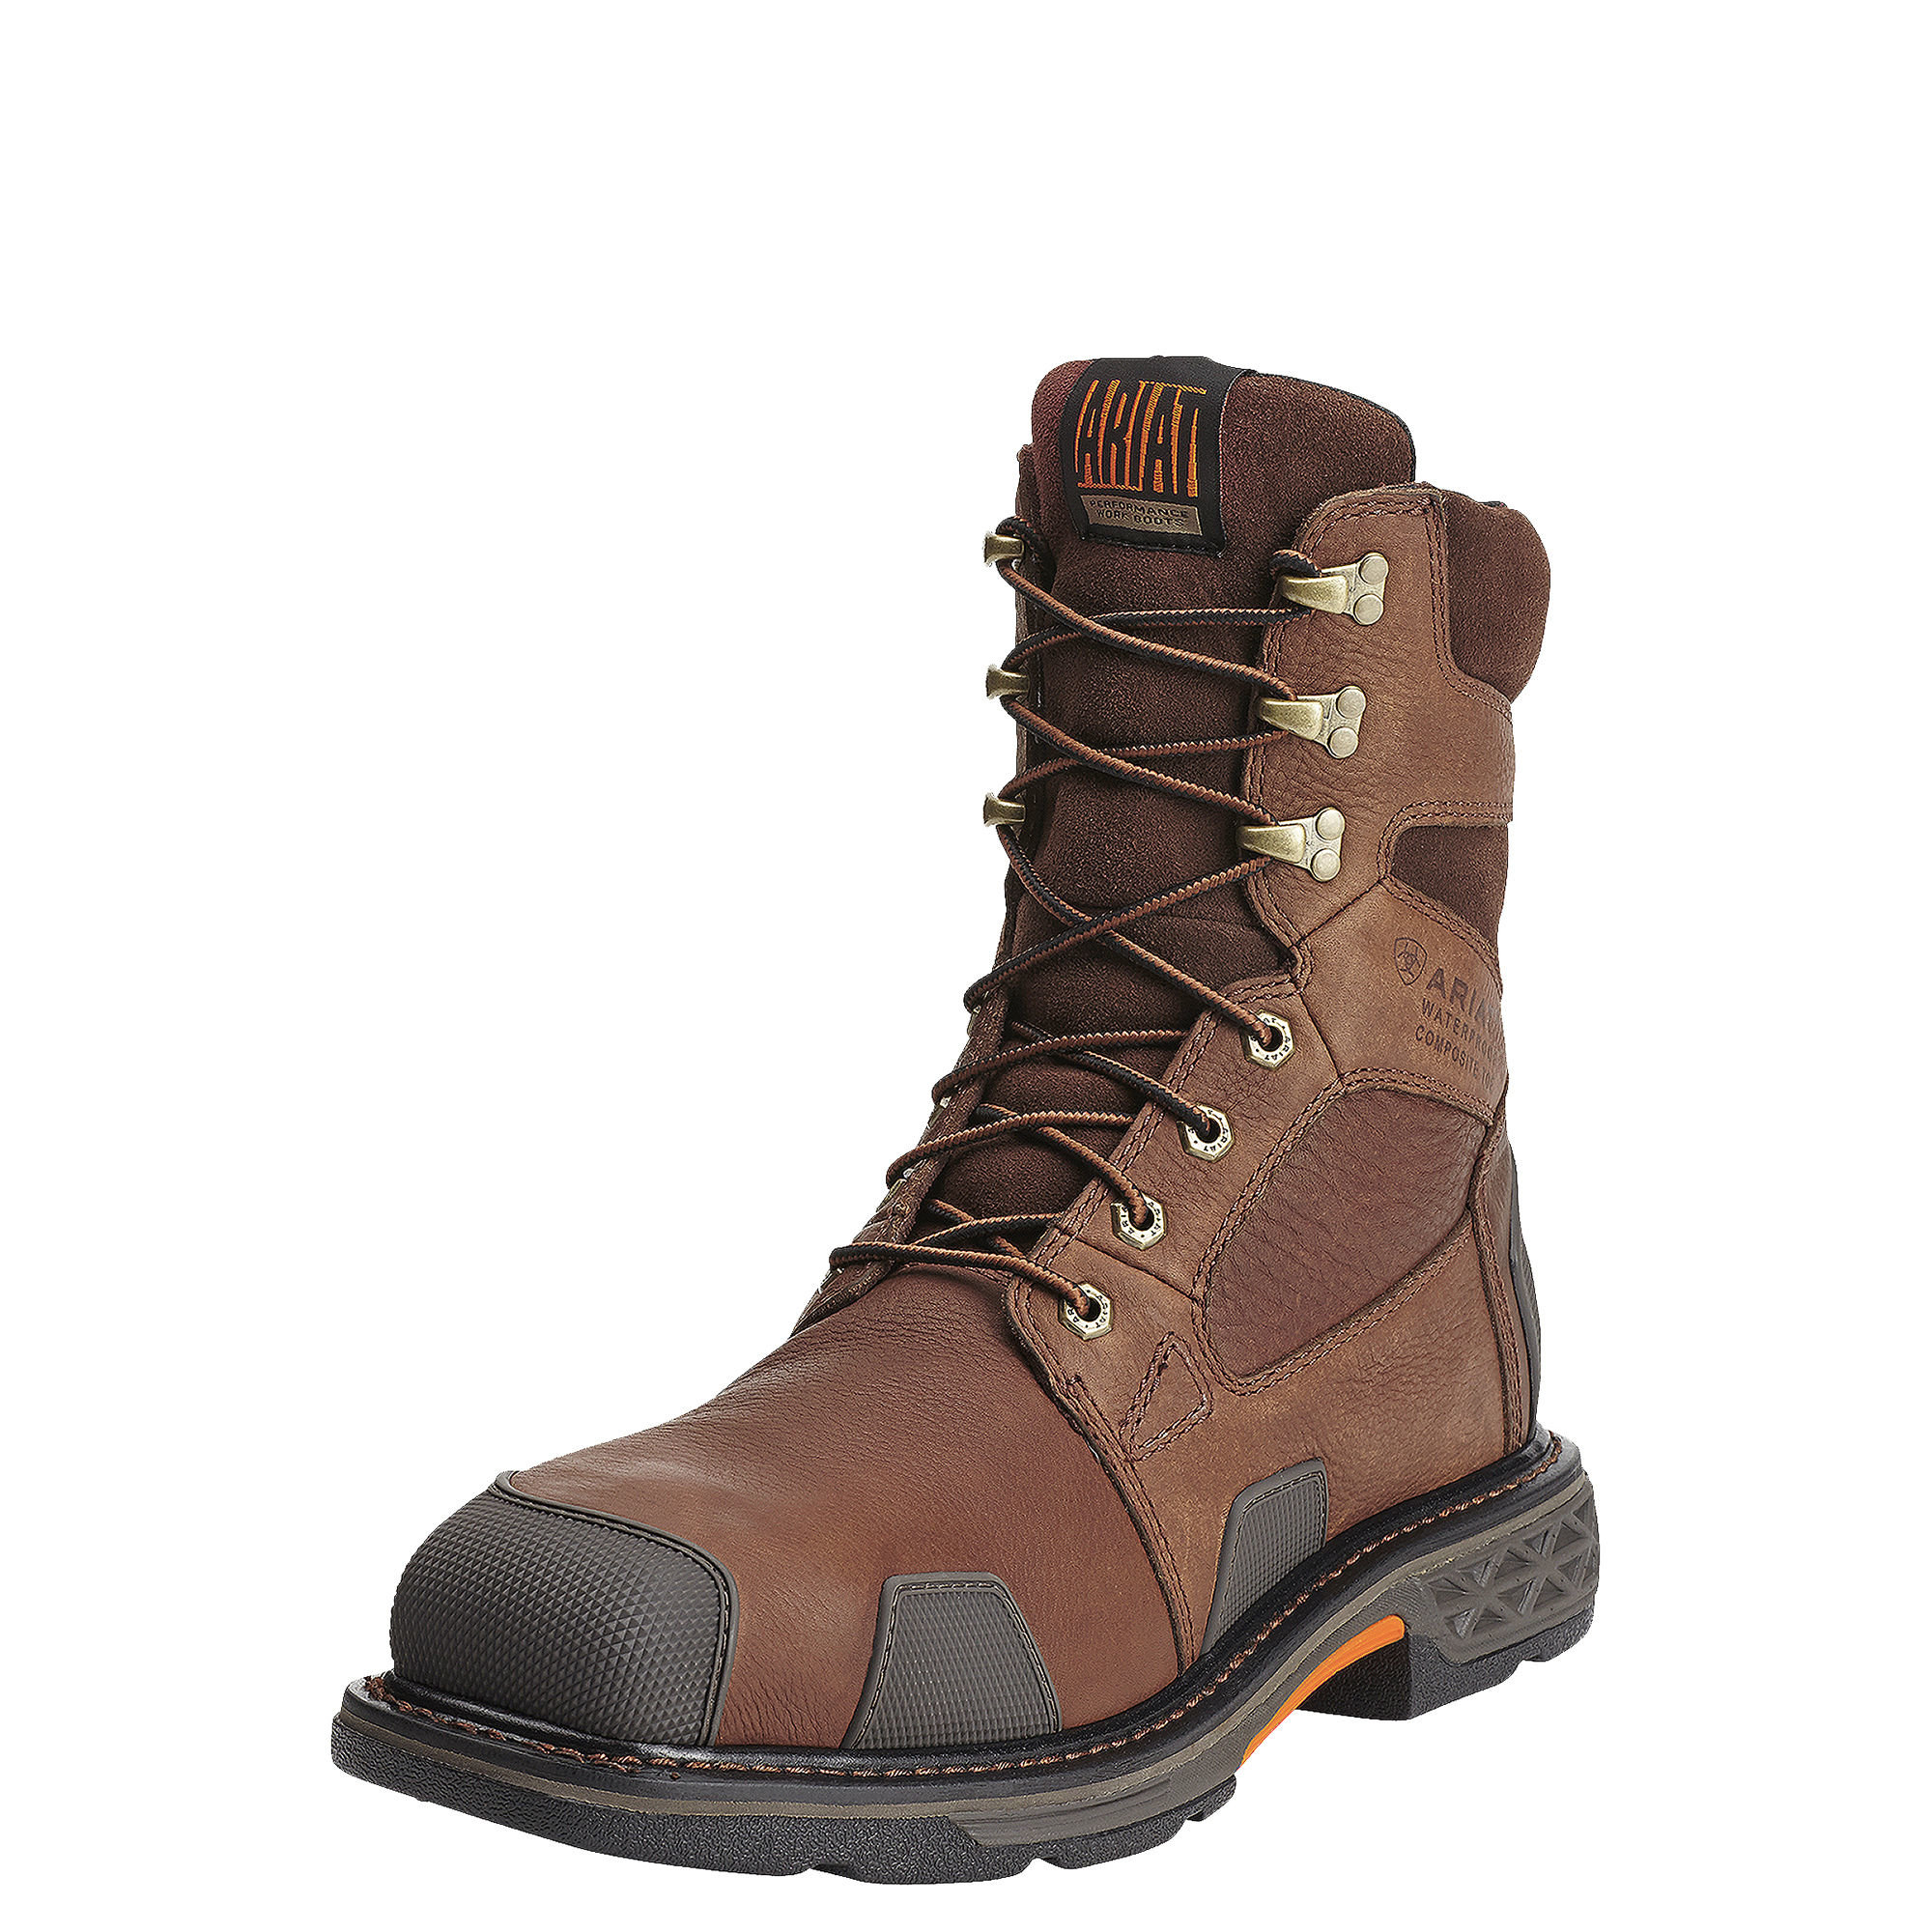 Ariat OverDrive 8 Inch Wide Square Waterproof Work Boots with Composite Toe from Columbia Safety